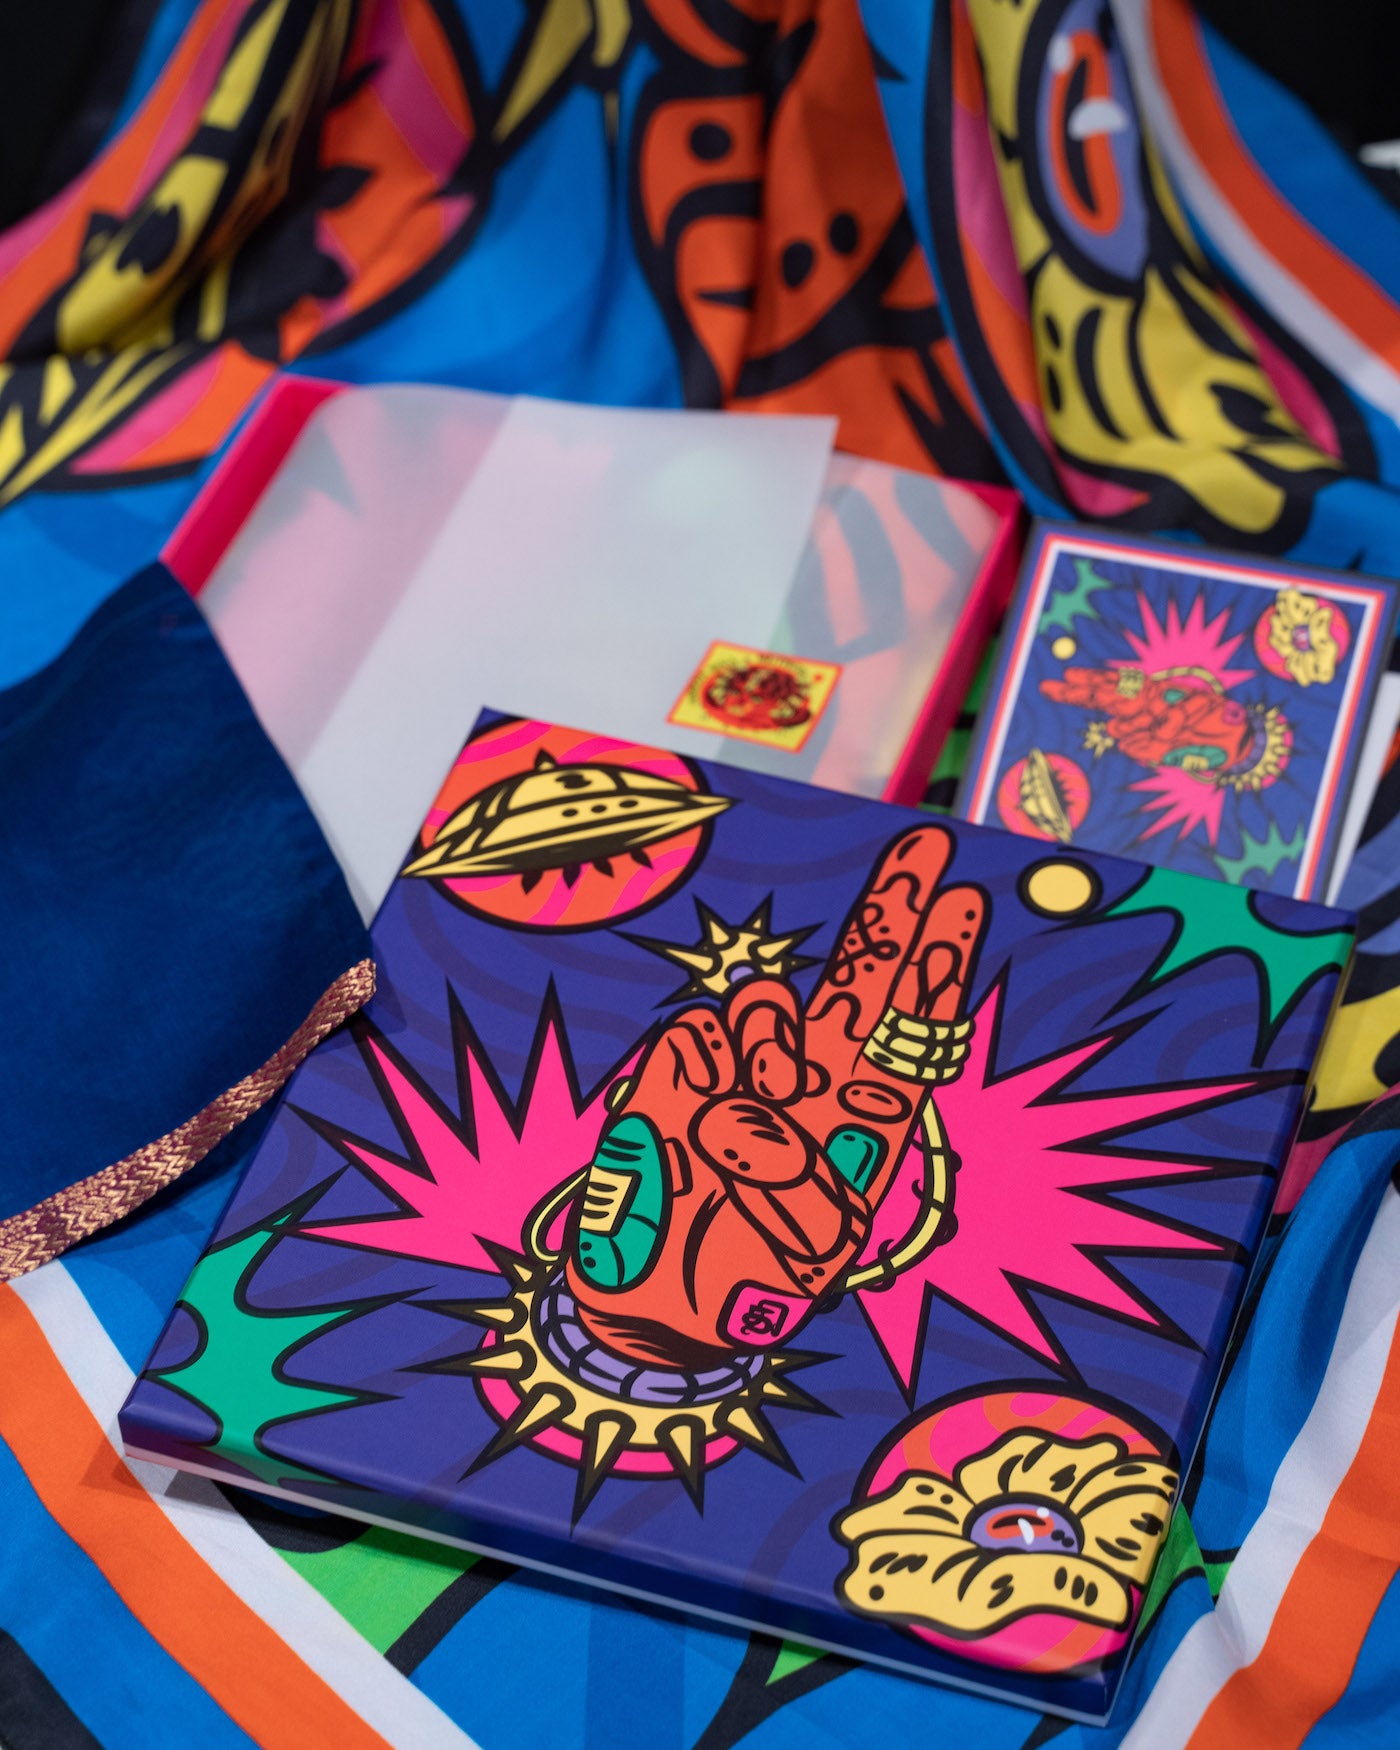 Prana| Limited Edition Scarf by Osheen Siva